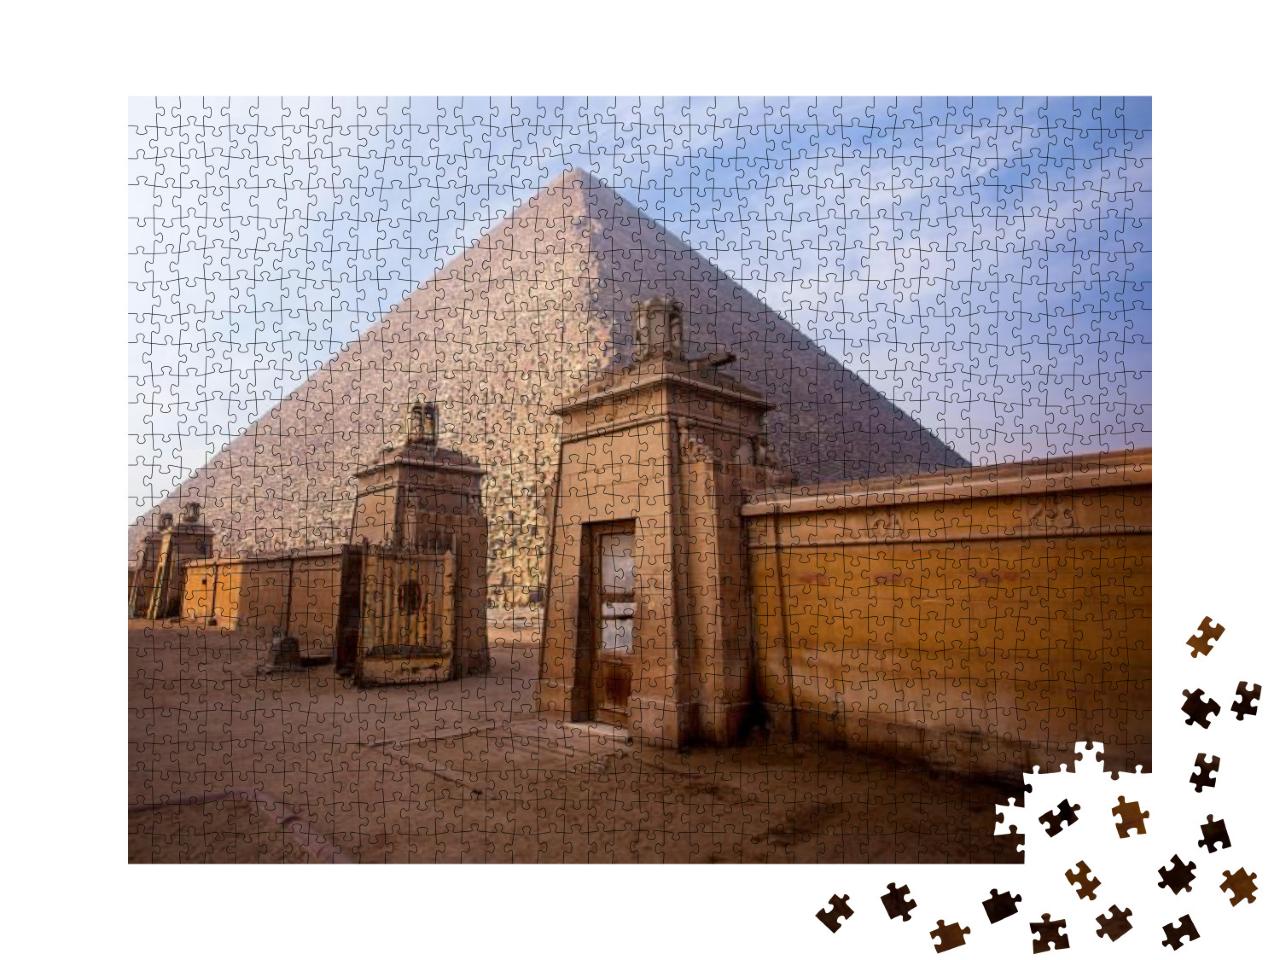 The Pyramids of Giza in Egypt... Jigsaw Puzzle with 1000 pieces